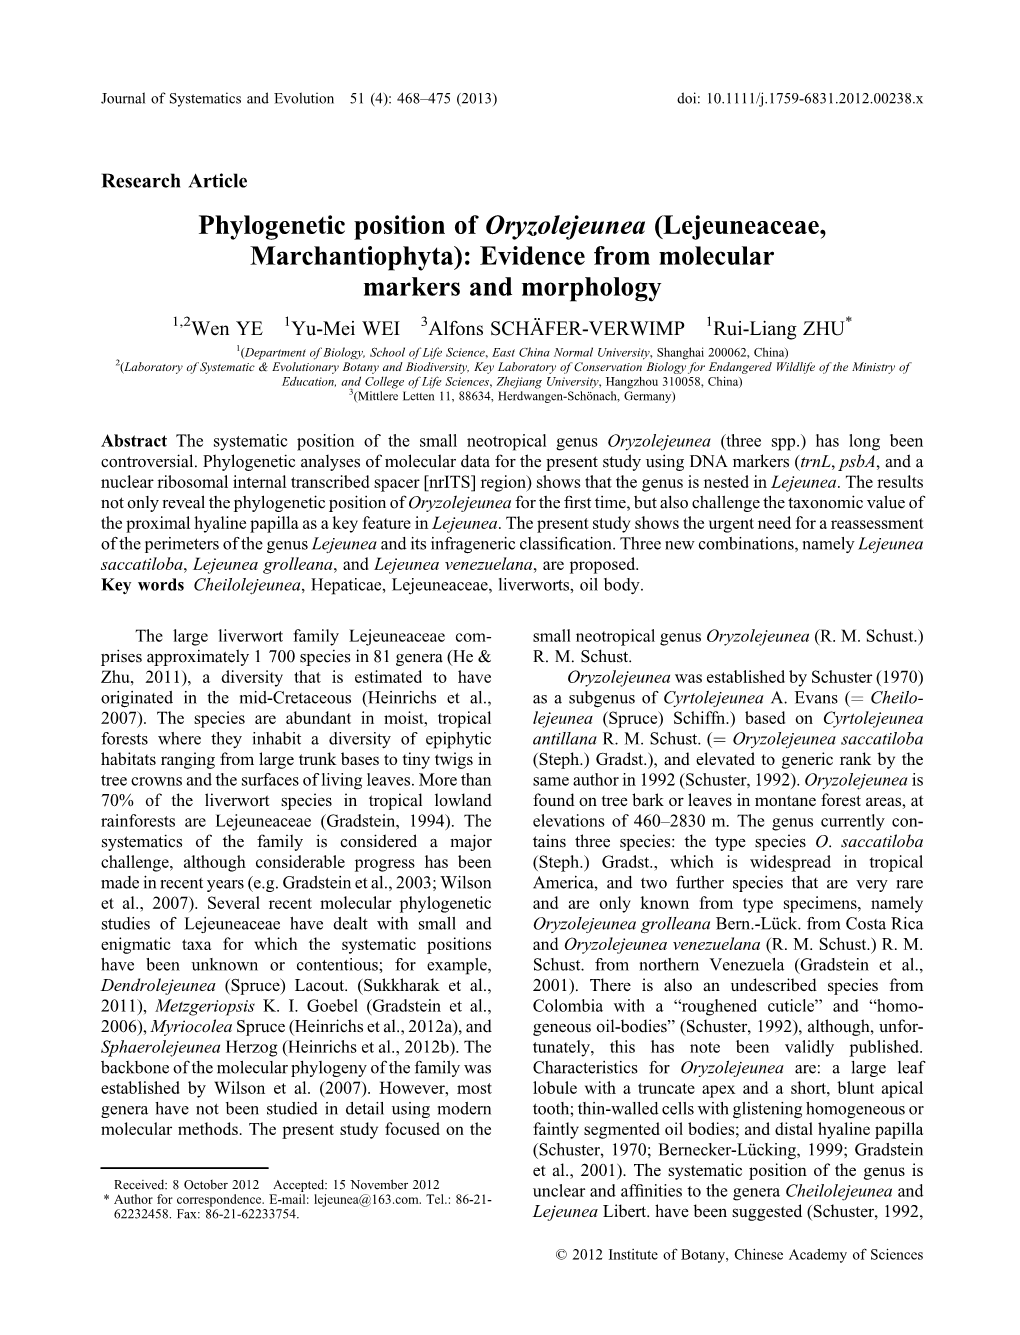 Phylogenetic Position of Oryzolejeunea (Lejeuneaceae, Marchantiophyta): Evidence from Molecular Markers and Morphology